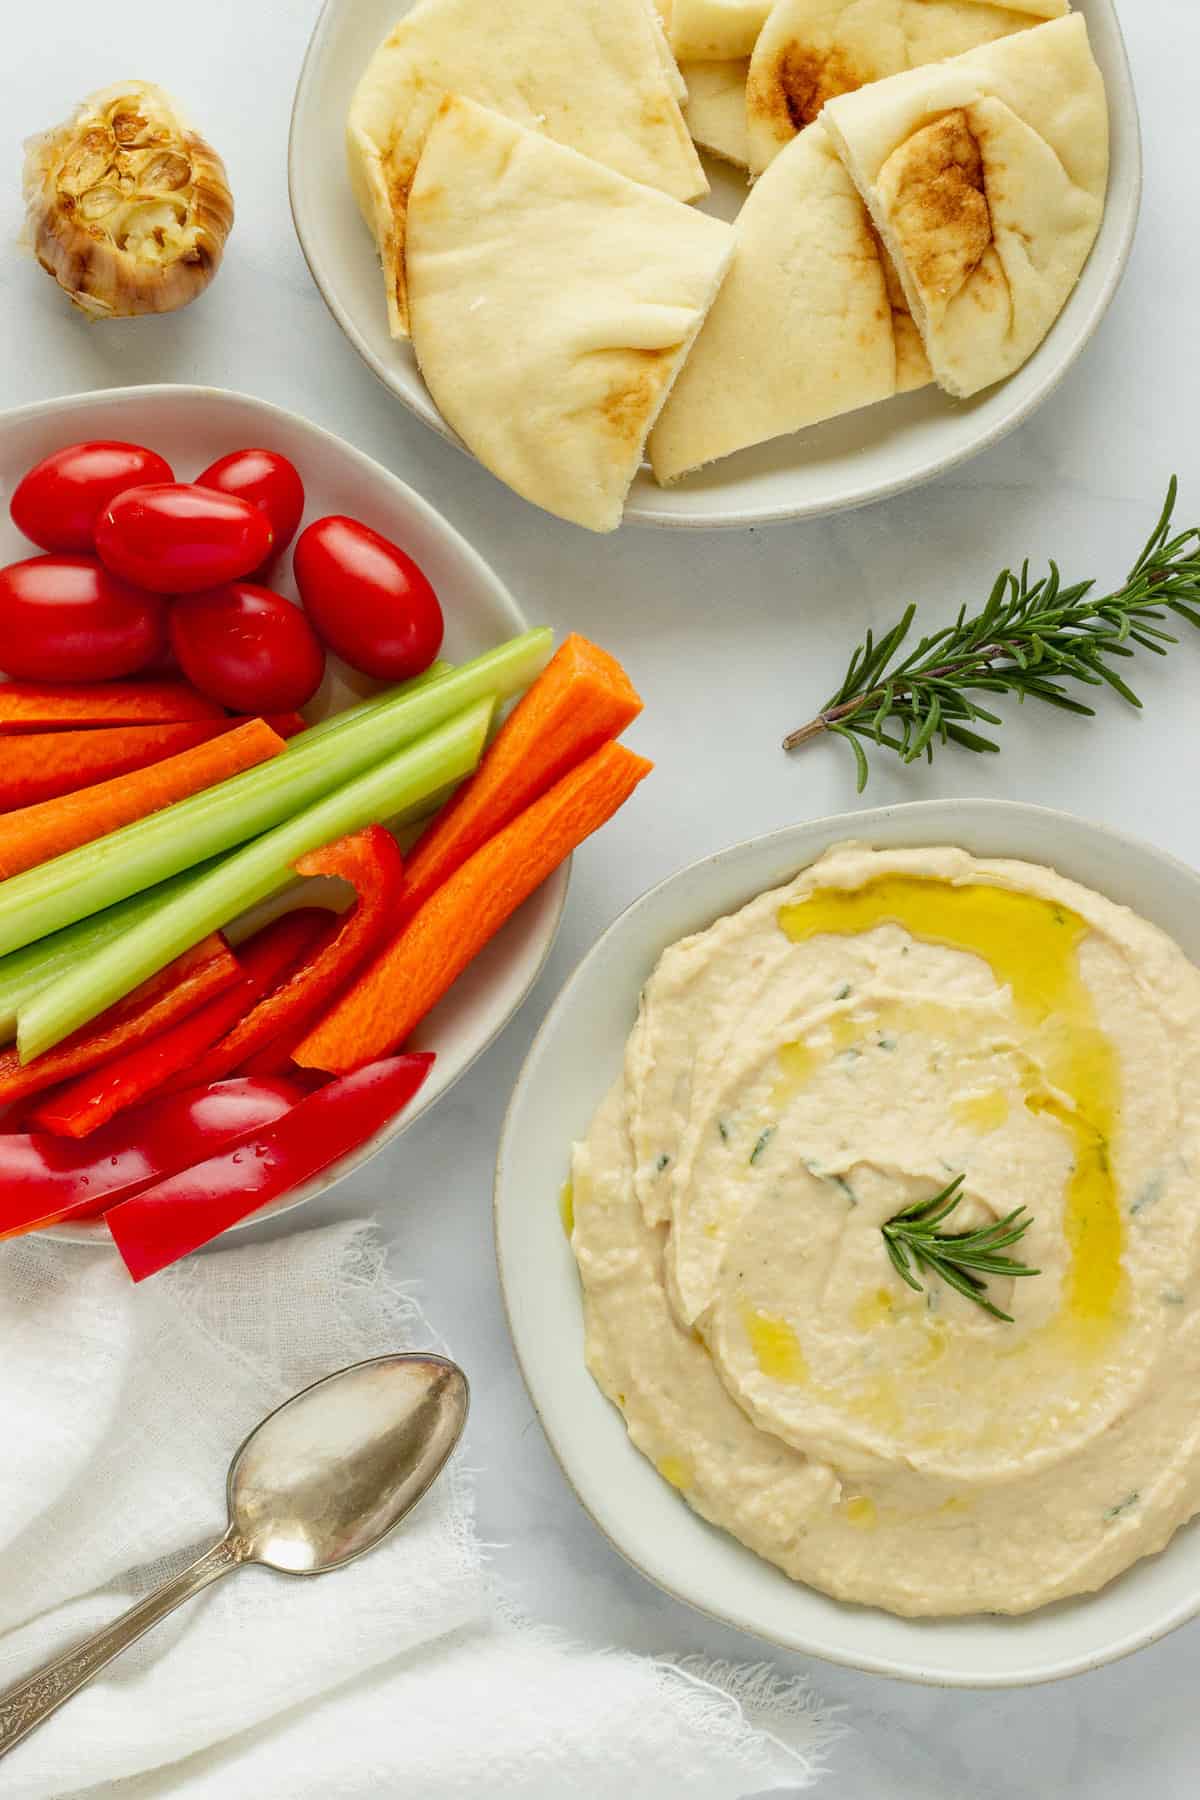 White bean dip spread on a white plate. A plate of cut vegetables and another with pita bread are in the background.